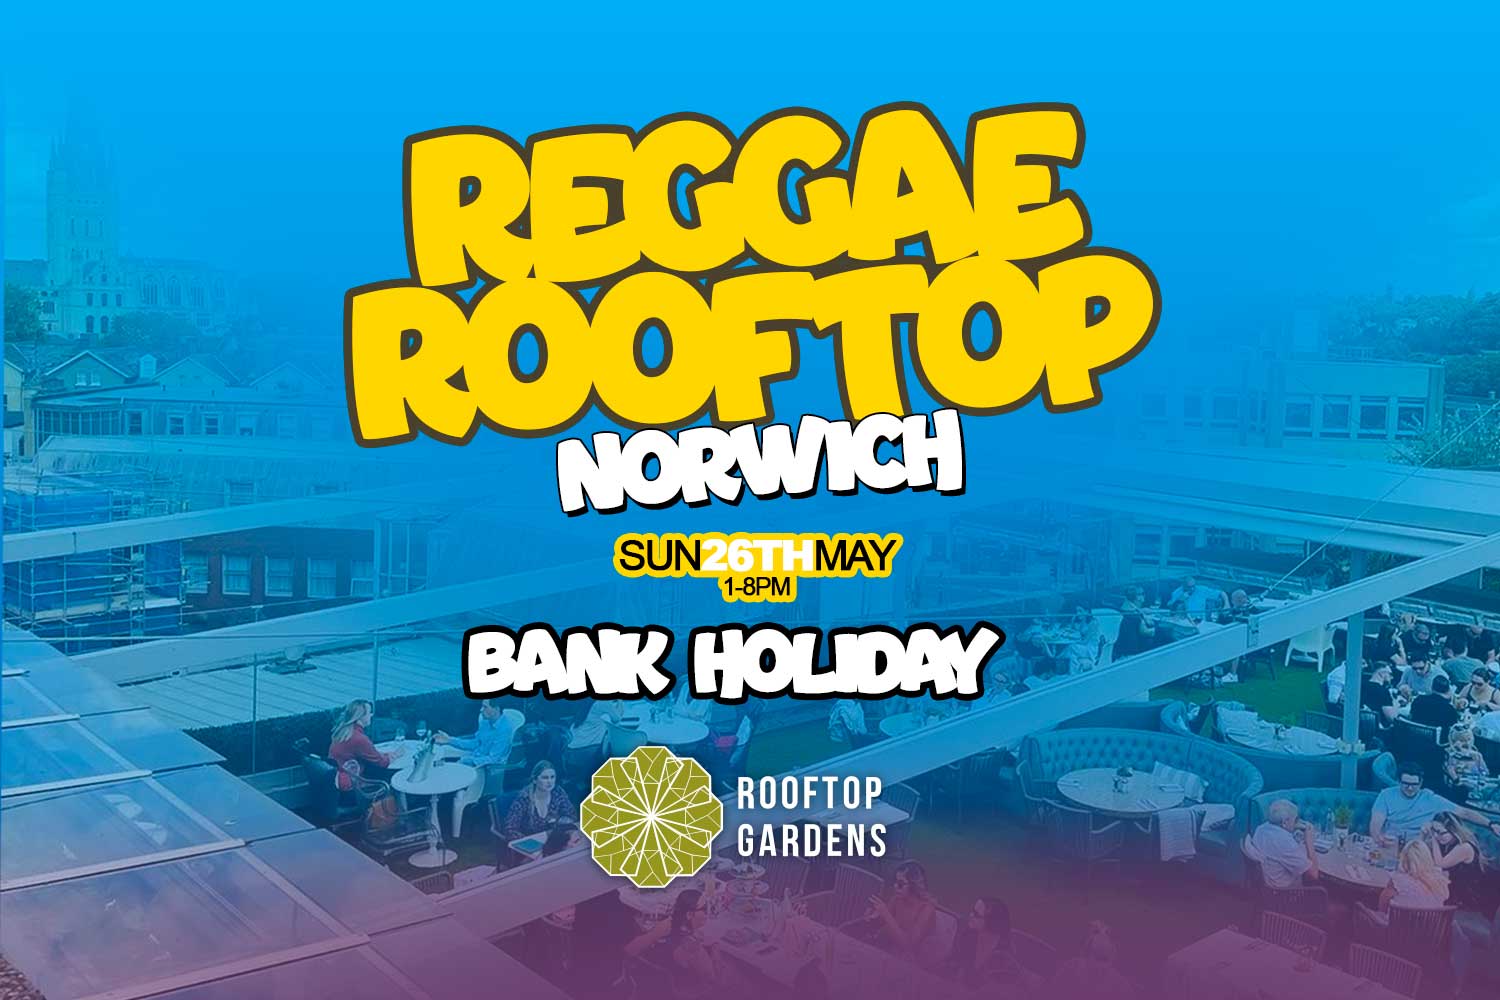 Sun, 26th May| Reggae Rooftop Norwich